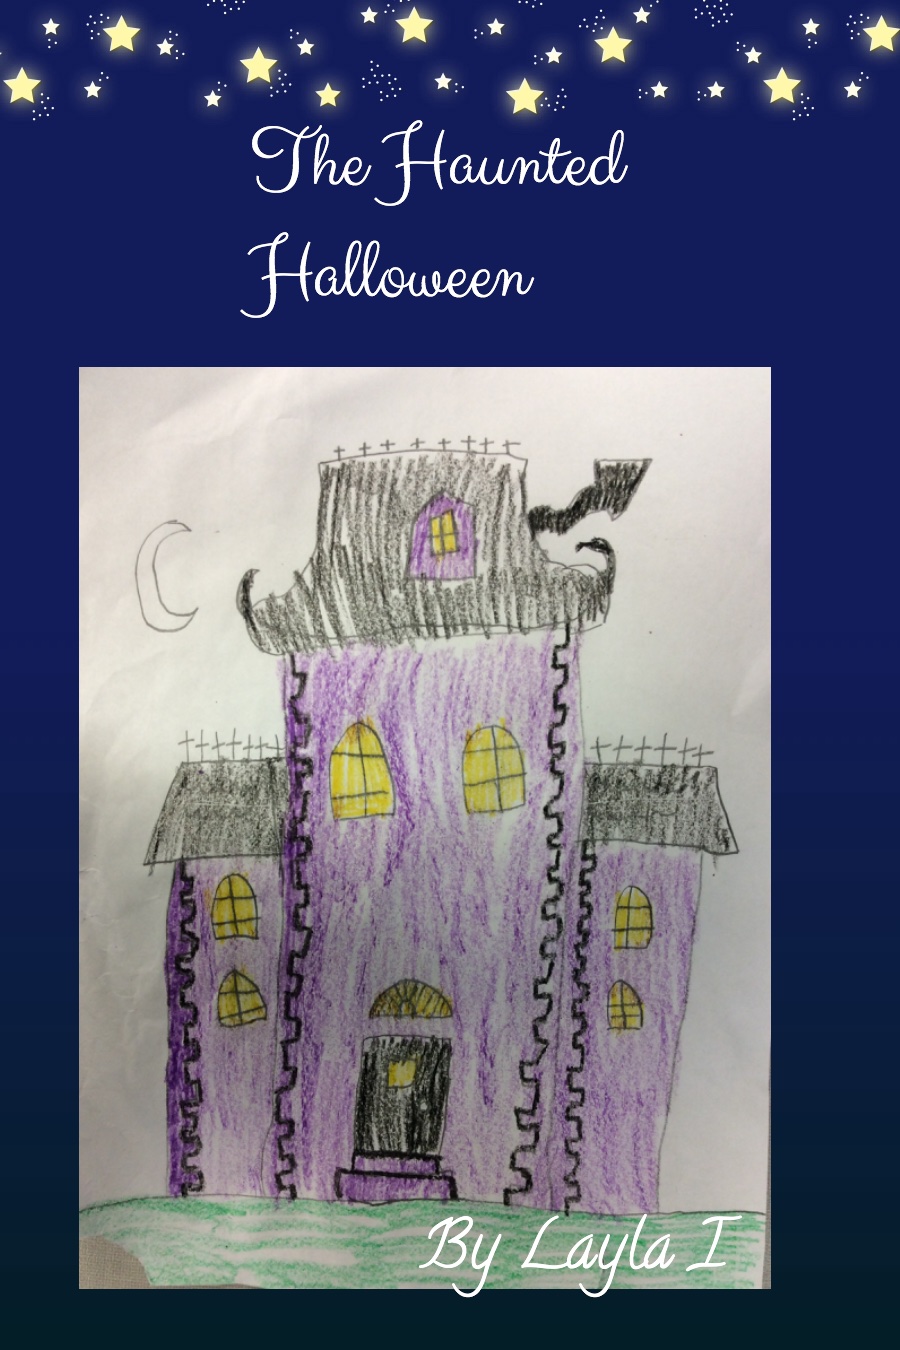 The Haunted Halloween by Layla I